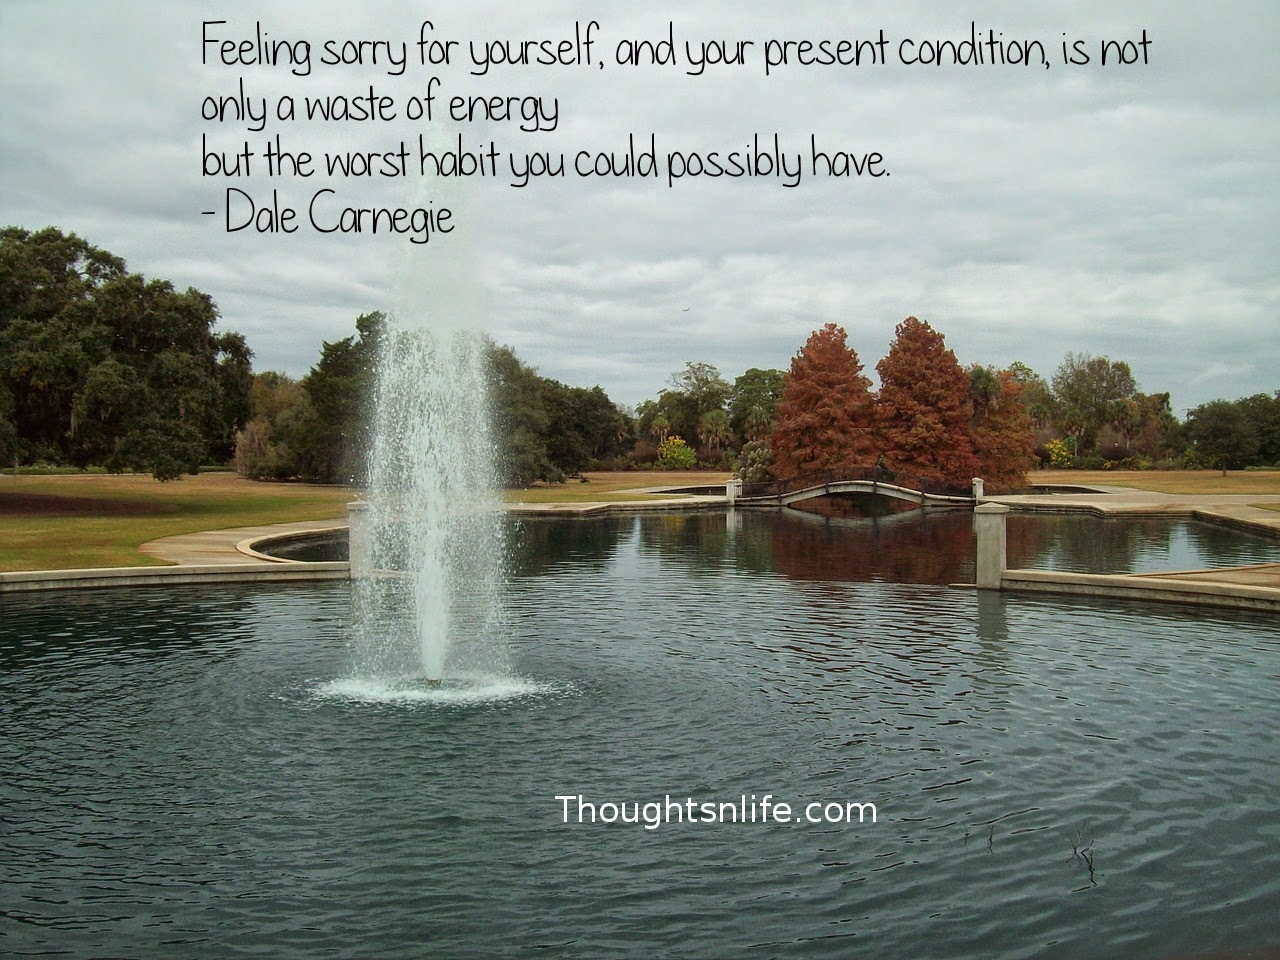 Thoughtsnlife.com: Feeling sorry for yourself, and your present condition, is not only a waste of energy but the worst habit you could possibly have. - Dale Carnegie